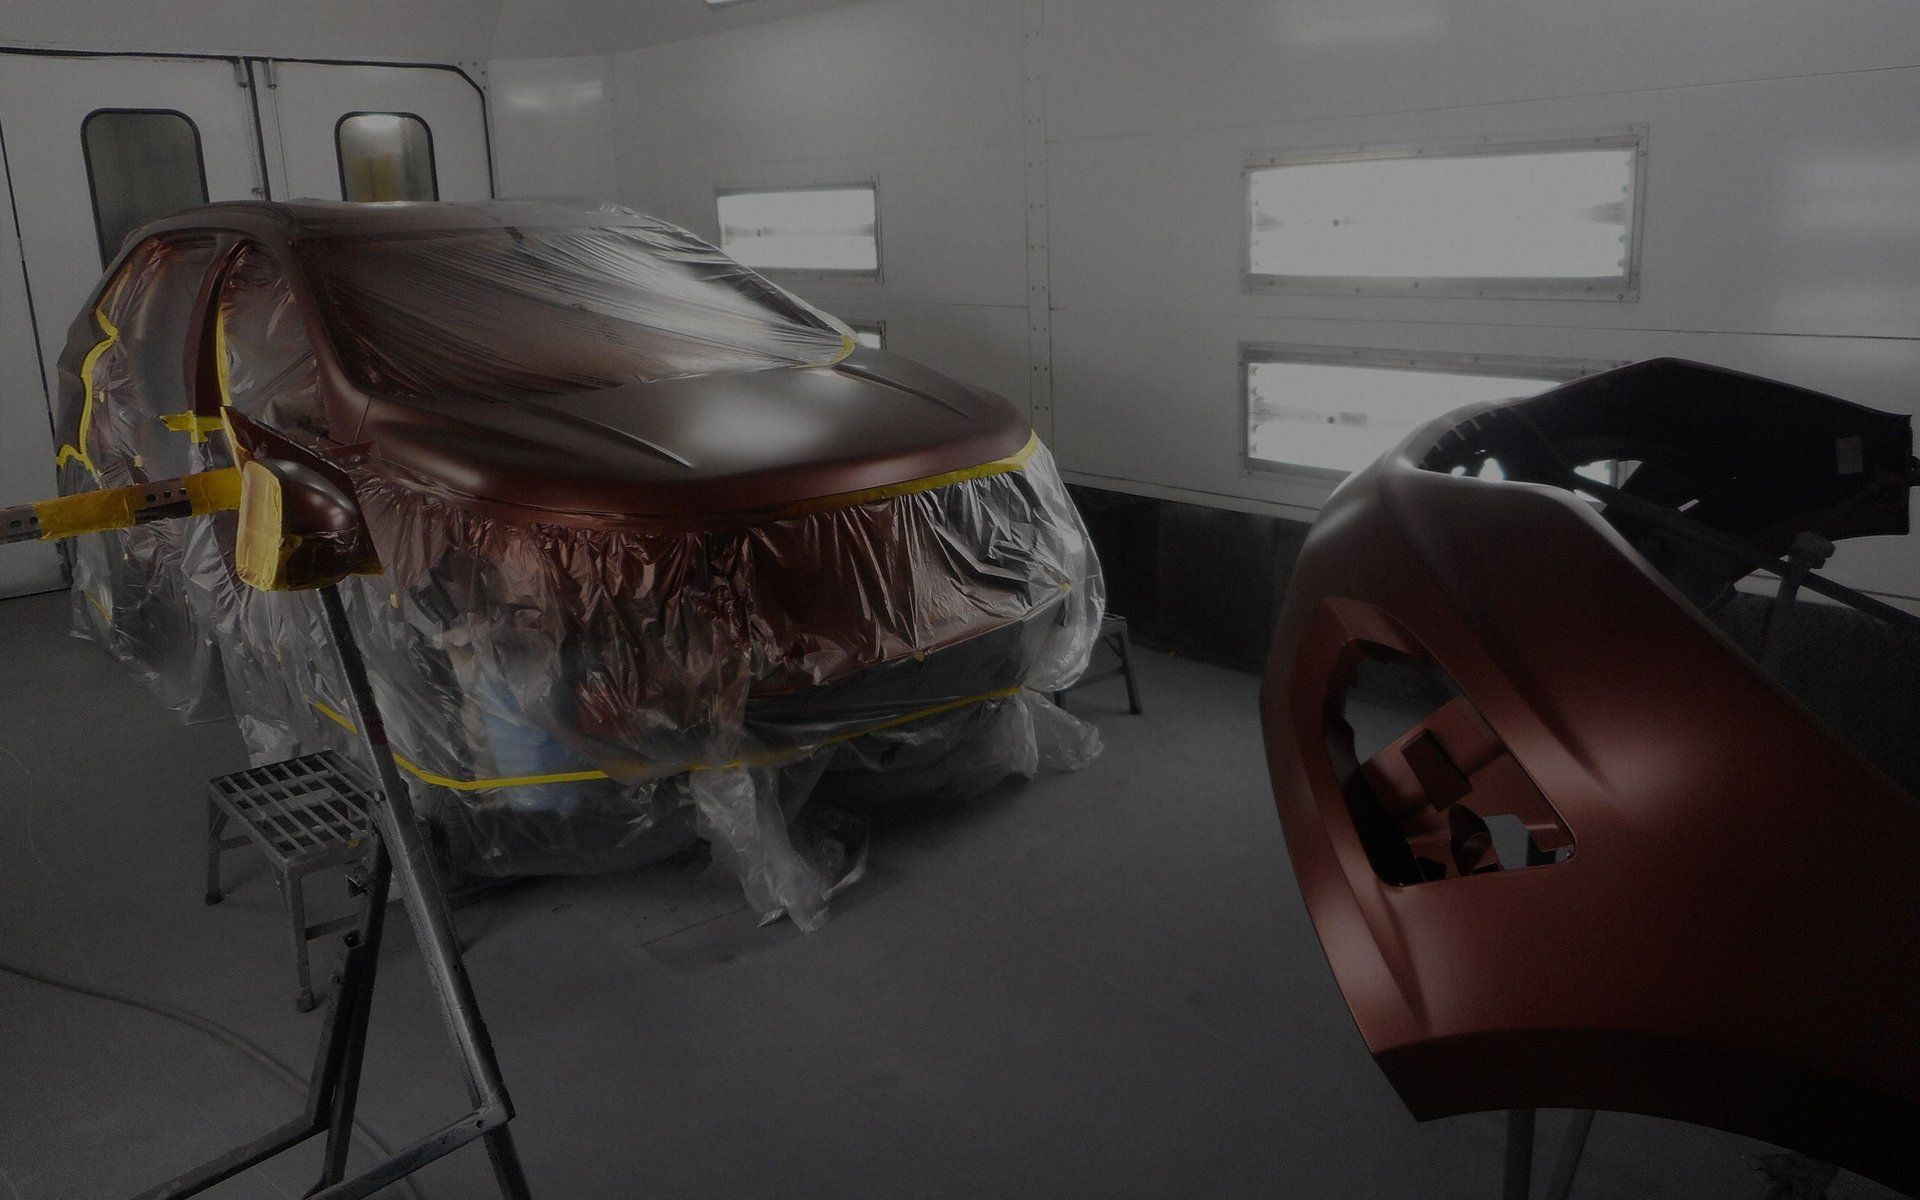 SUV being painted